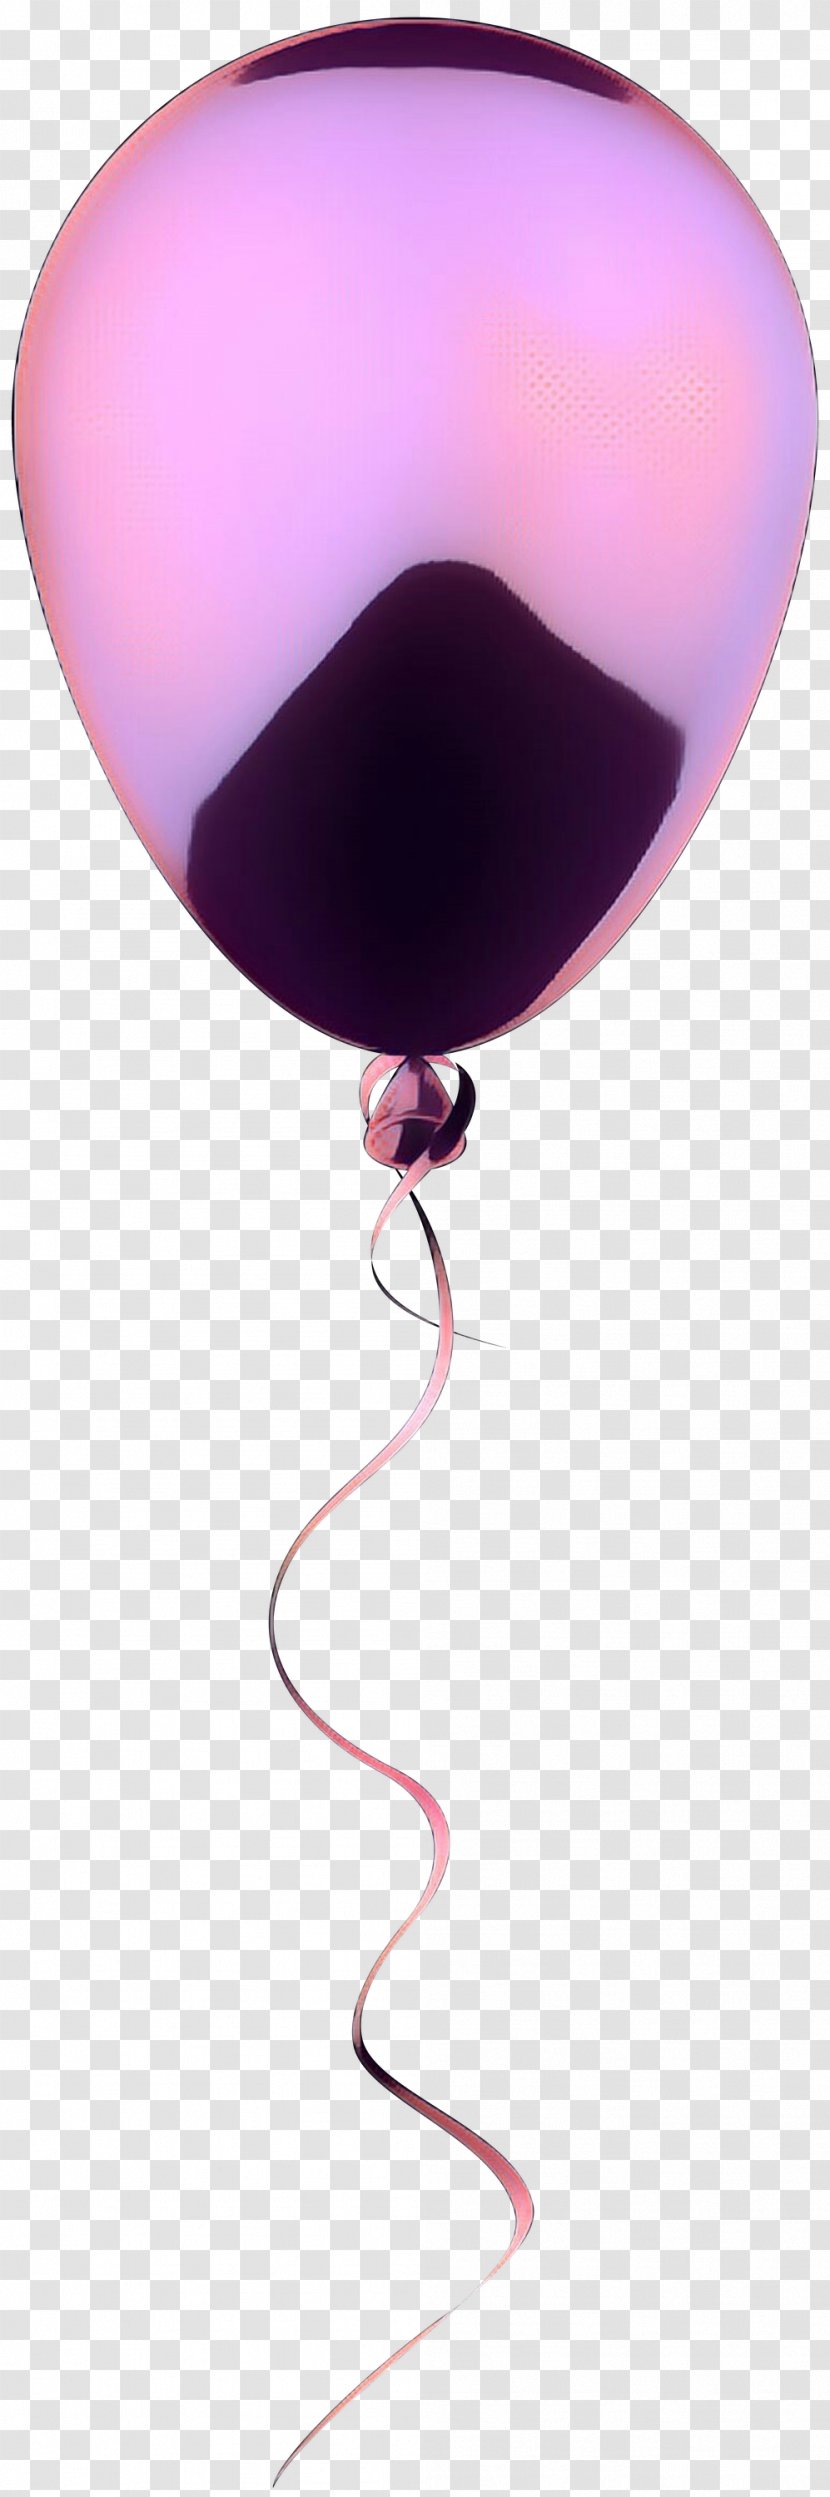 Hot Air Balloon - Jewellery Toy Transparent PNG